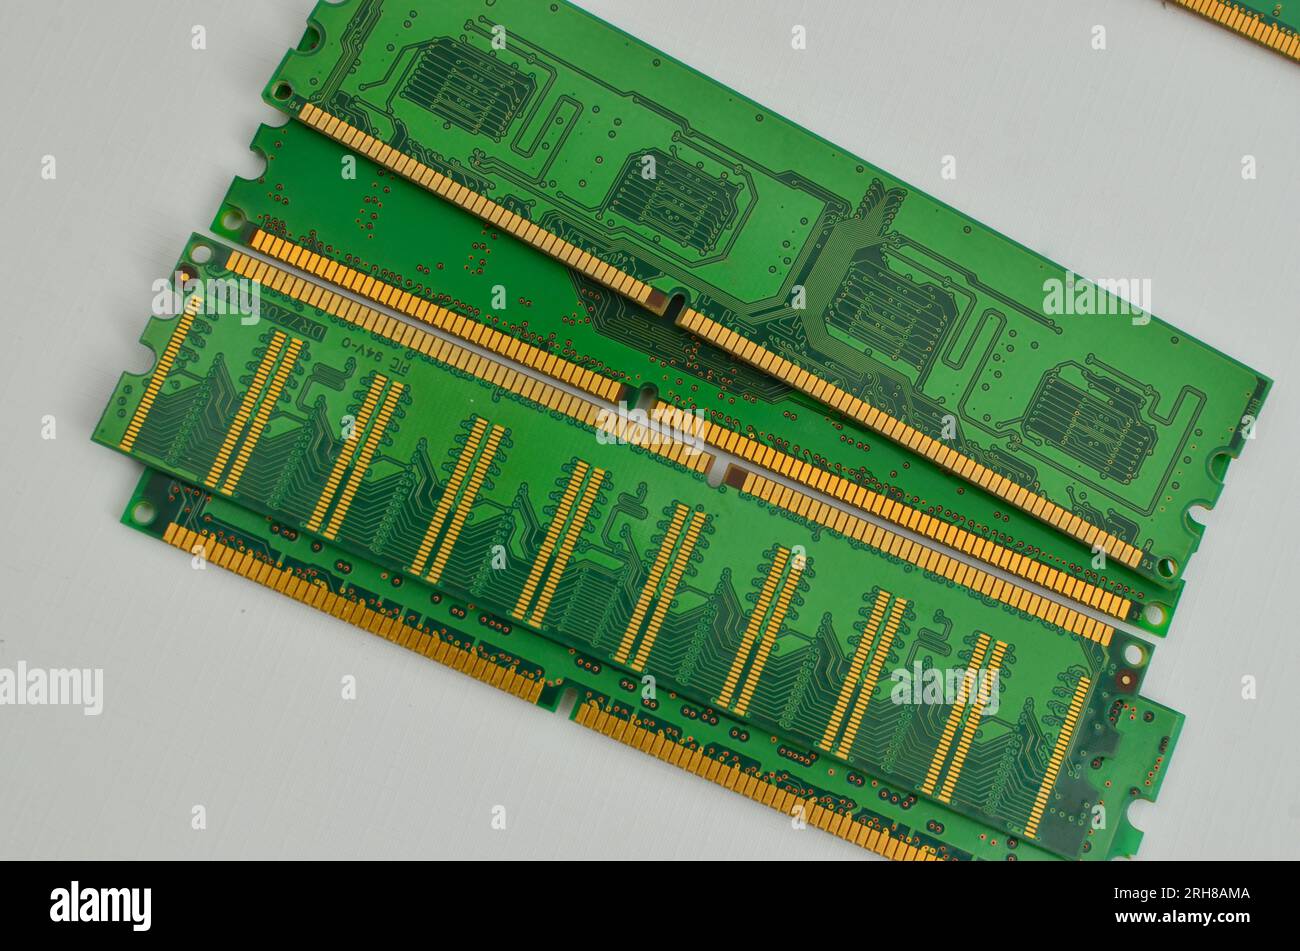 Closeup of a DDR4 RAM memory card, on a light background, illustrating technological innovation in the field of information technology. Stock Photo